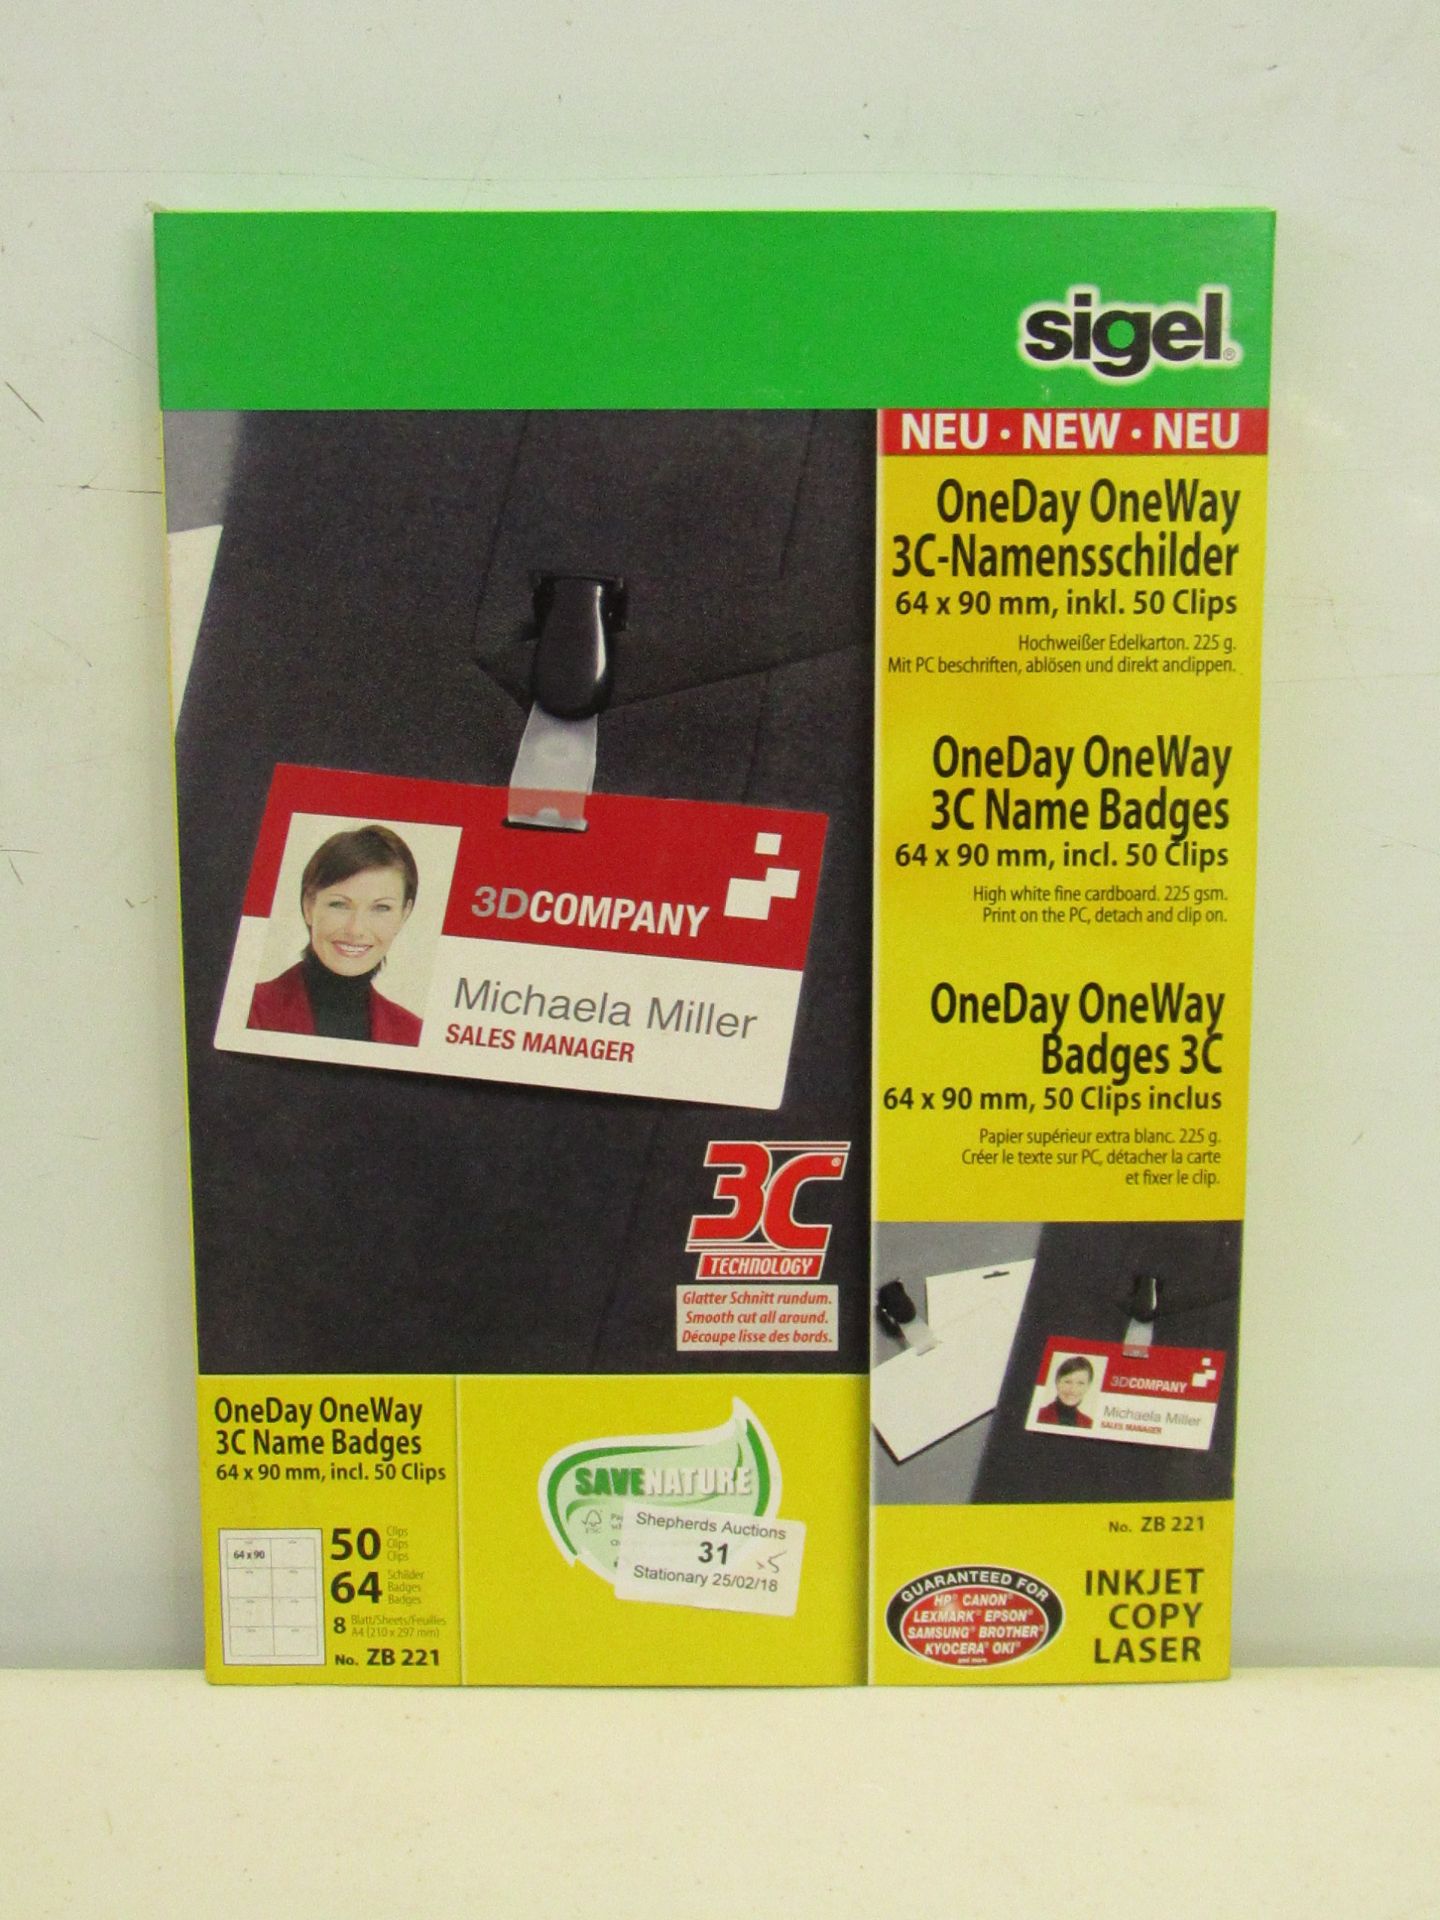 5x packs of Sigel A4 3C Oneday Oneway White Name Badges, each pack includes 50 clips and 64